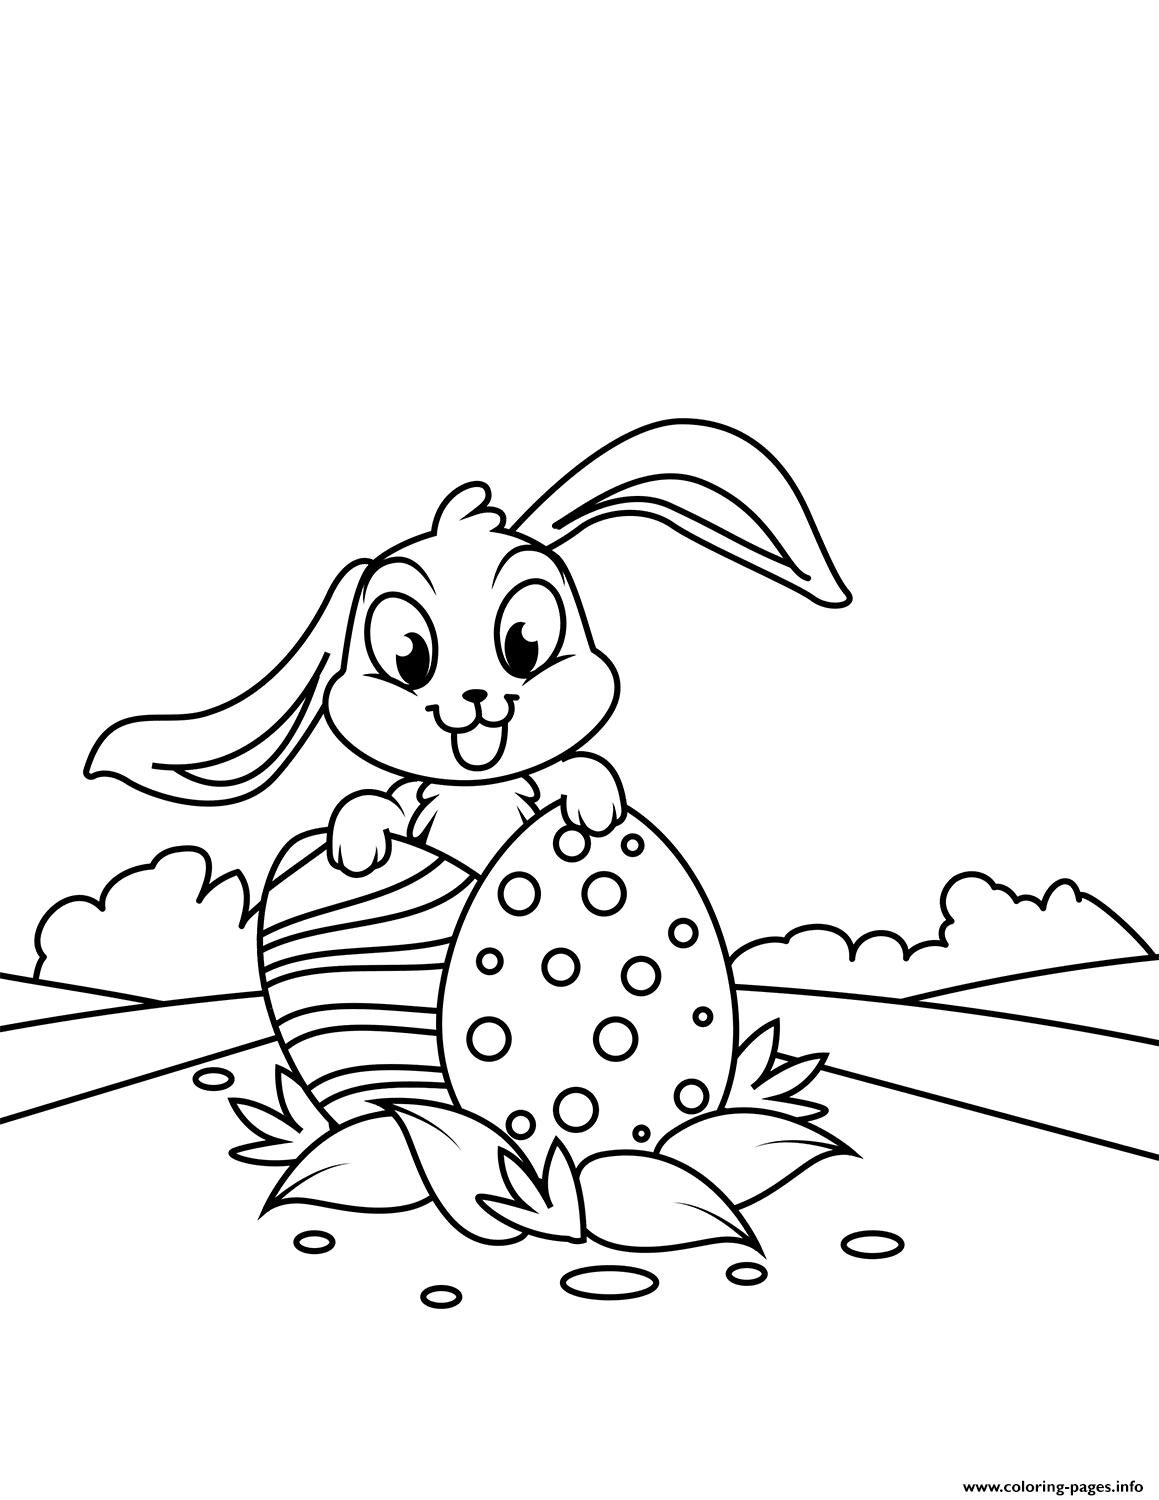 Cute Bunny With Two Easter Eggs coloring